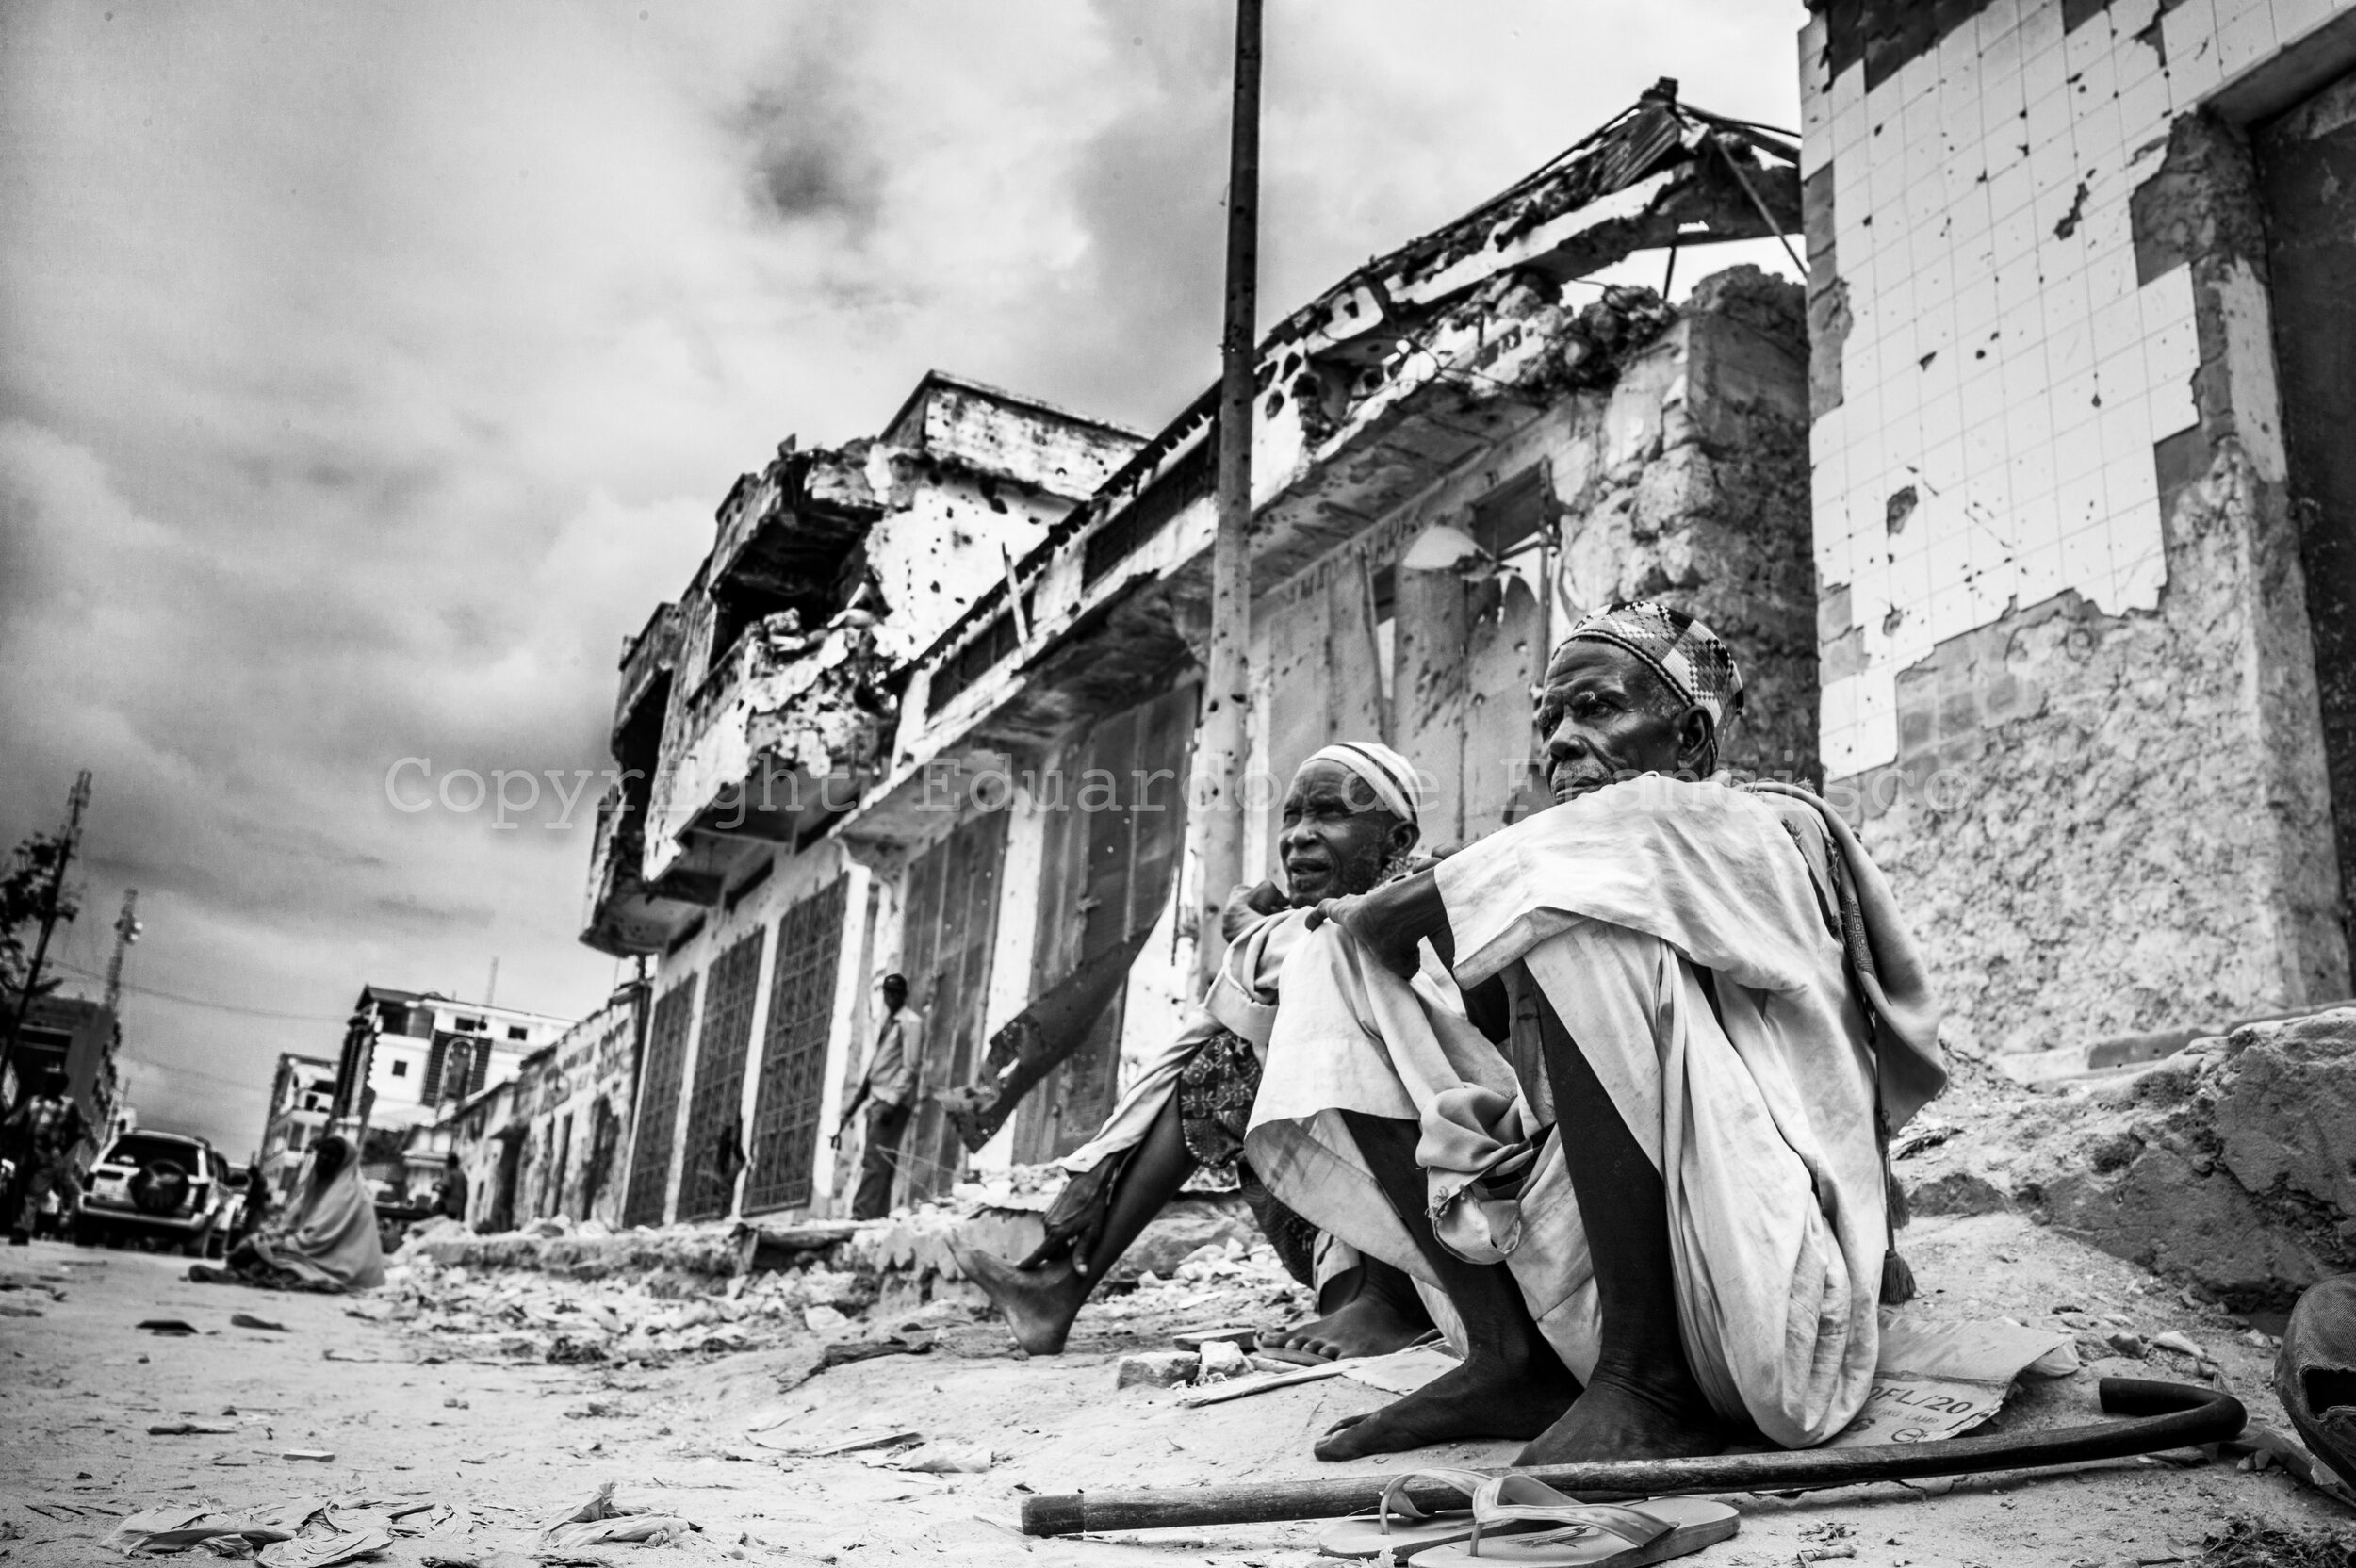  Two old men in the street going to Bakaara Market in Mogadishu, the biggest commercial centre of Somalia and still fiercely disputed by diverse militias from the city that finance themselves by taxing the shop owners 